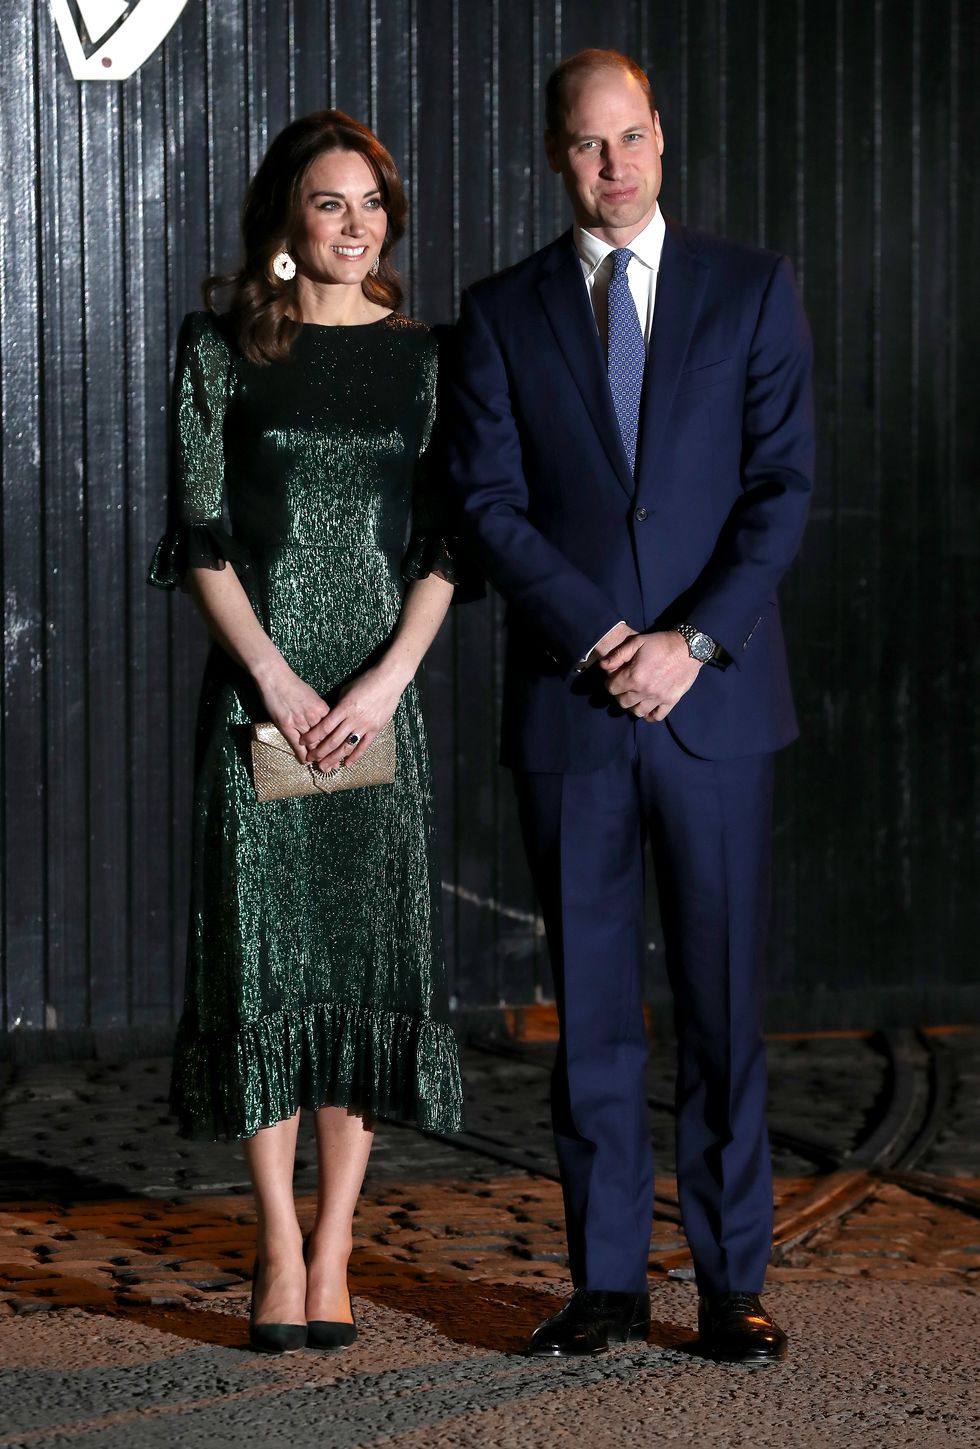 dublin, ireland   march 03 catherine, duchess of cambridge and prince william, duke of cambridge attend a reception hosted by the british ambassador to ireland robin barnett at the guinness storehouse’s gravity bar during day one of their visit to ireland on march 03, 2020 in dublin, ireland photo by chris jacksongetty images